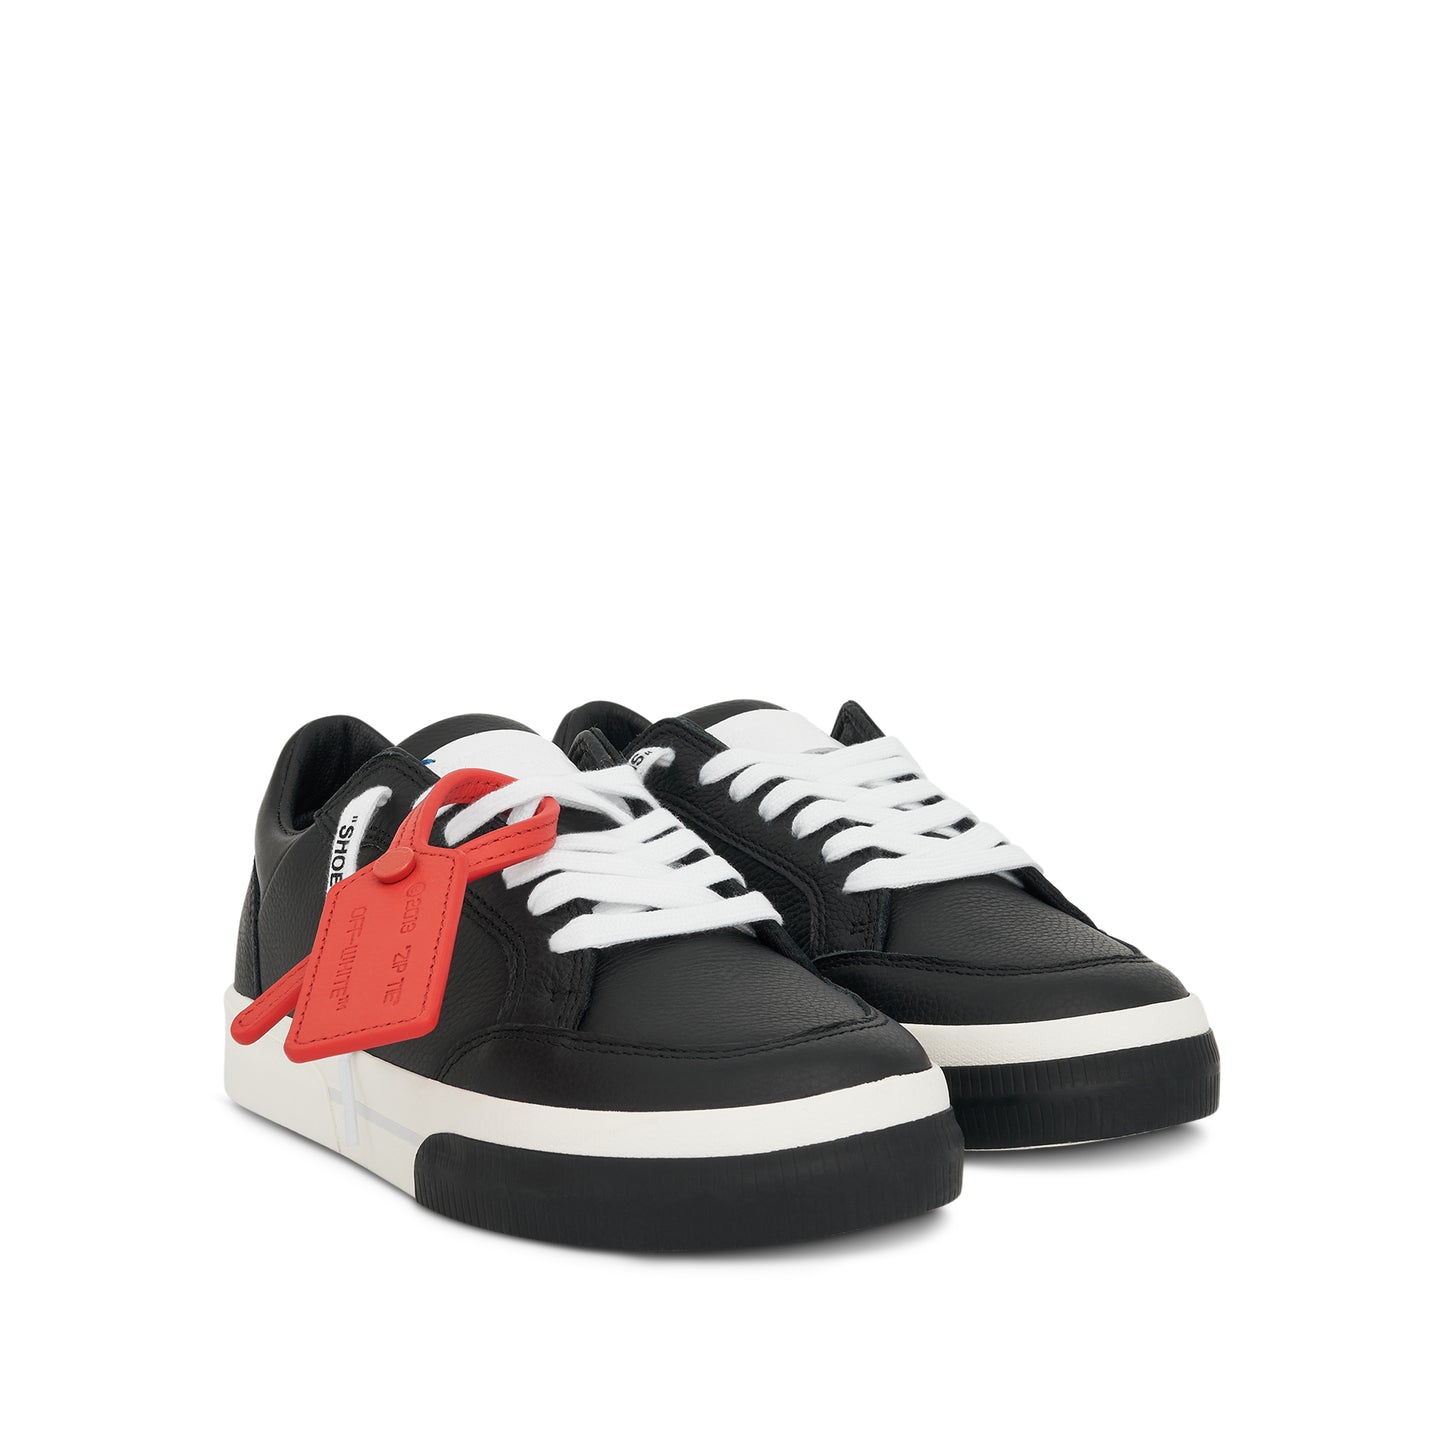 Out of Office Calf Leather Sneaker in Dark Grey/Black